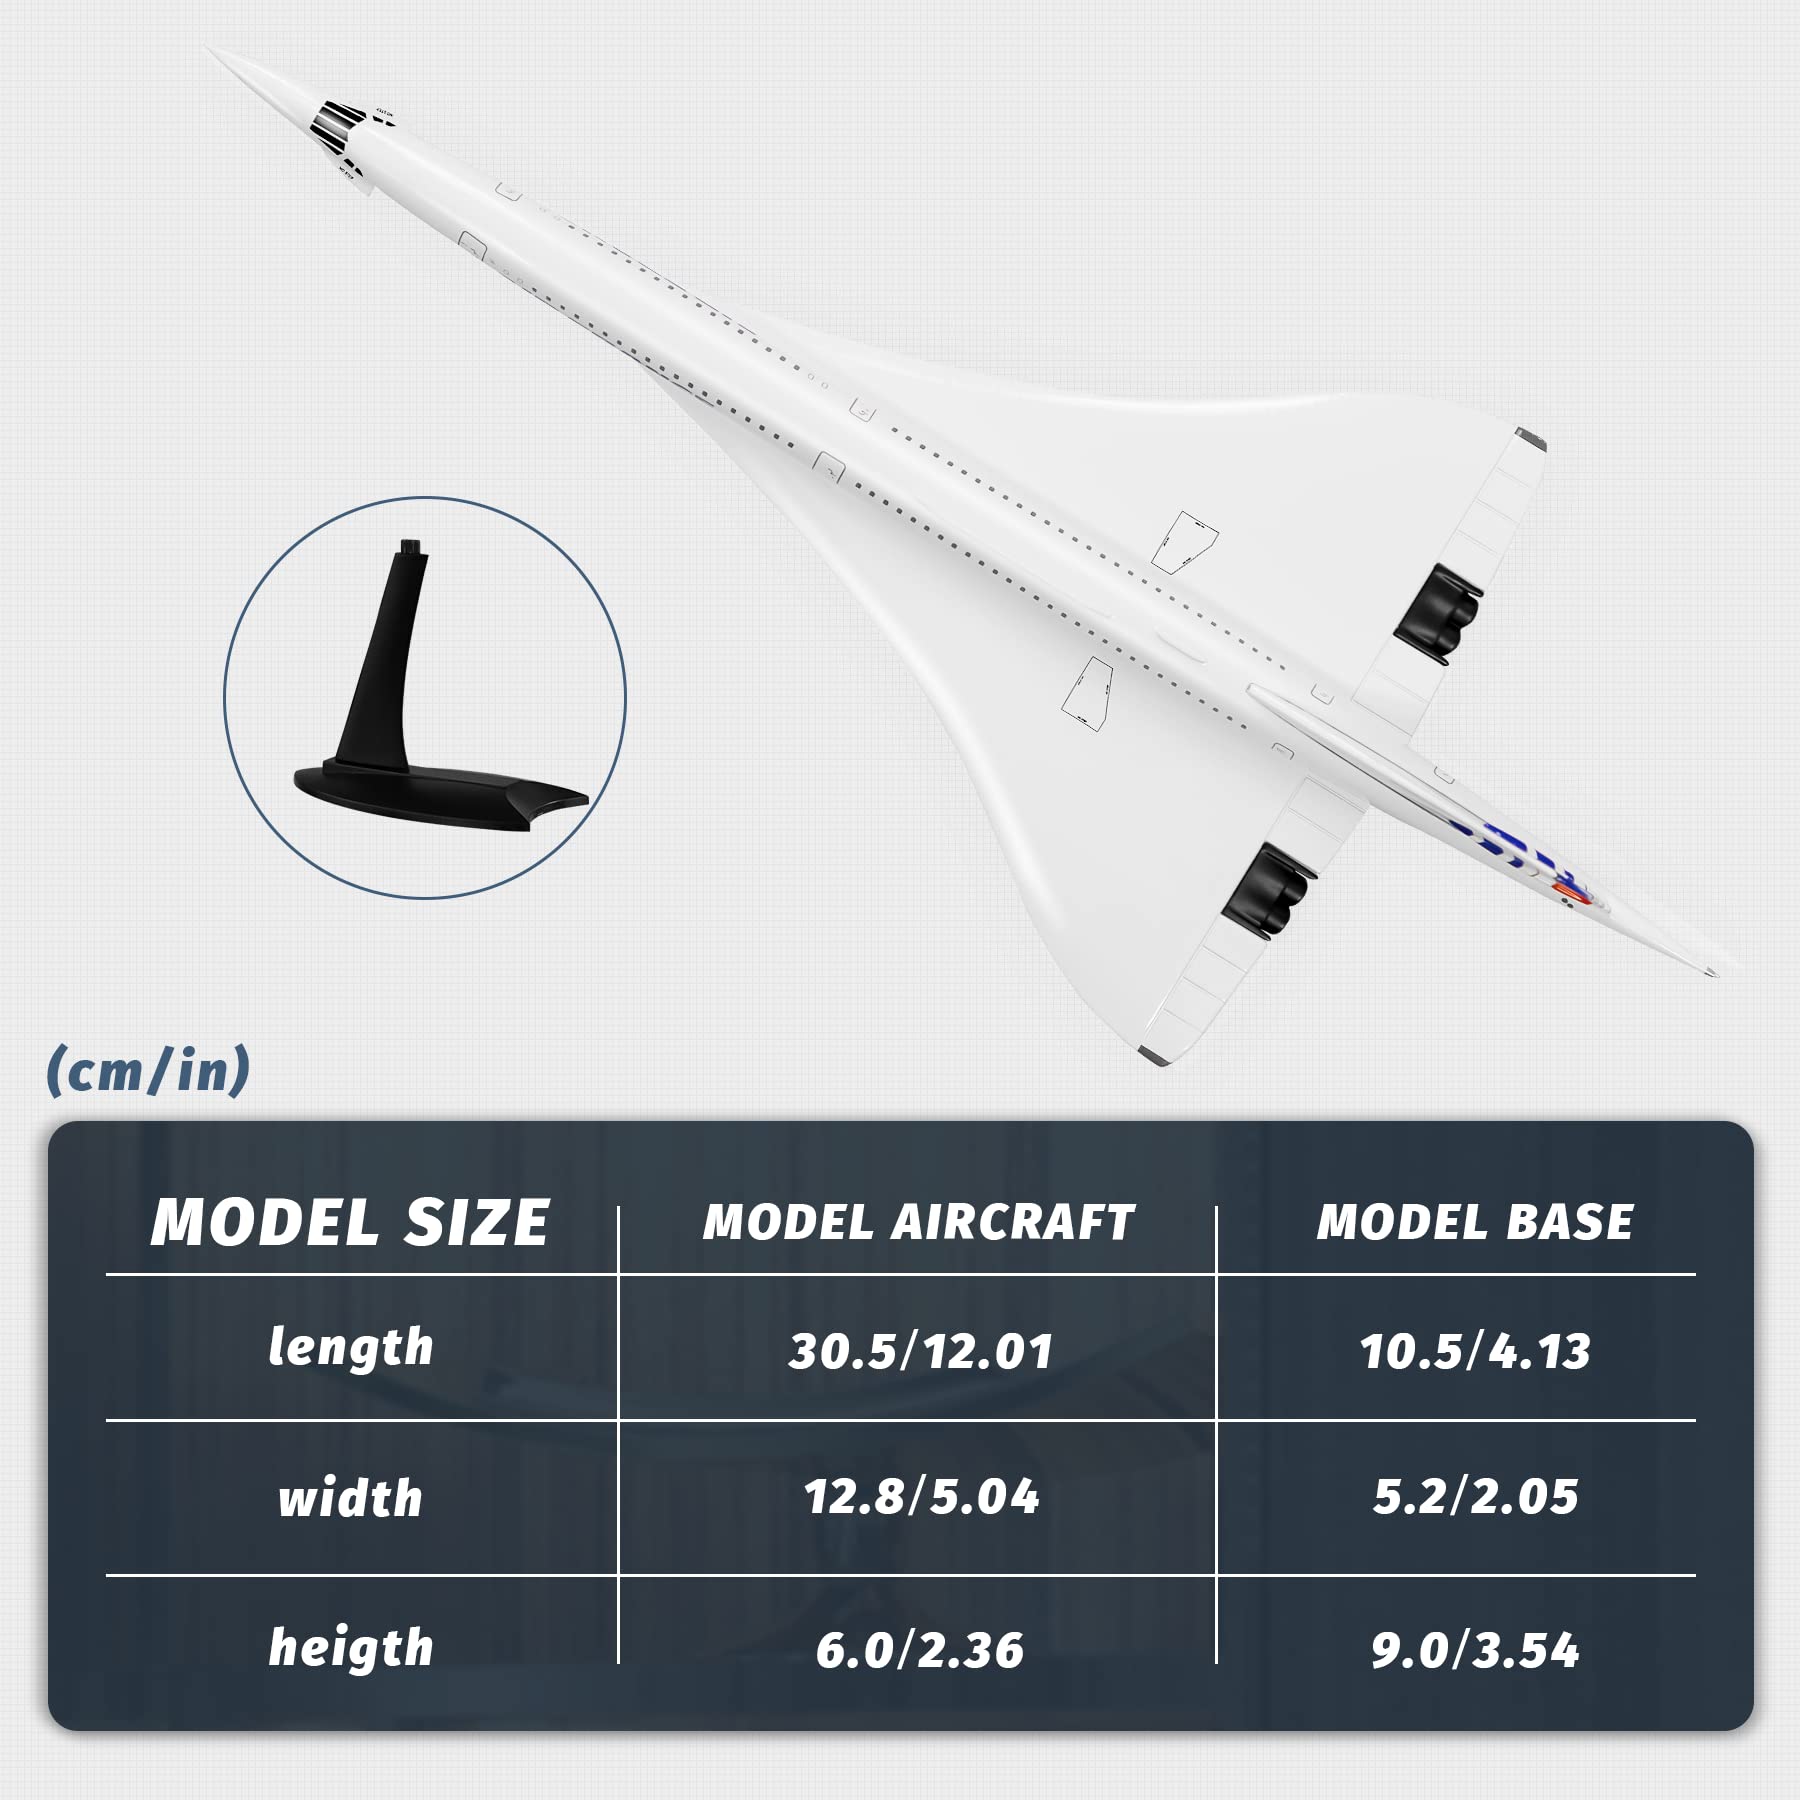 Lose Fun Park 1:200 Scale Concorde Plane Model Airplane Air France Plane F-BVFB Alloy Diecast Airplanes Model Planes for Adults Collection and Gift